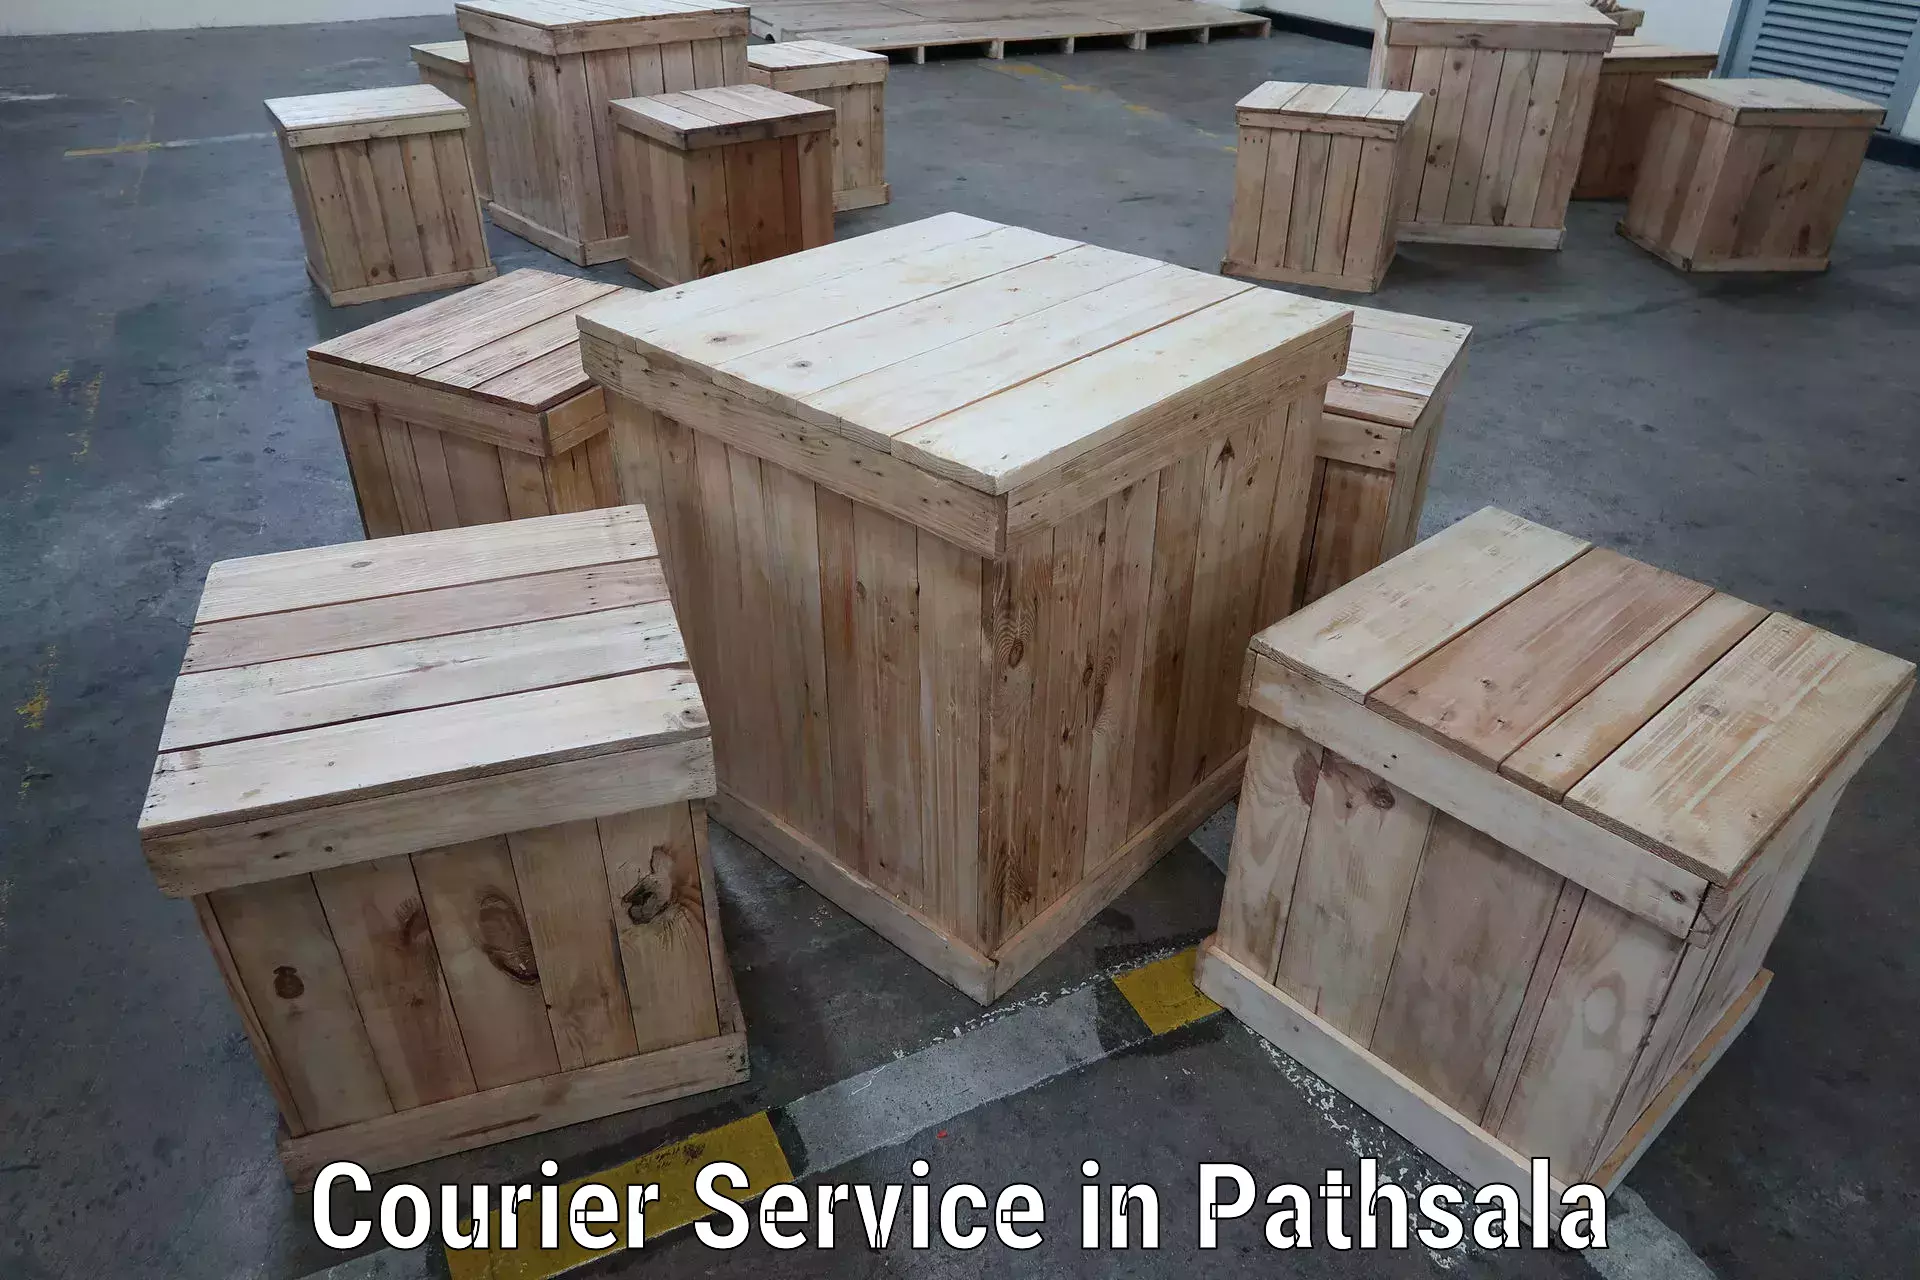 Express courier capabilities in Pathsala